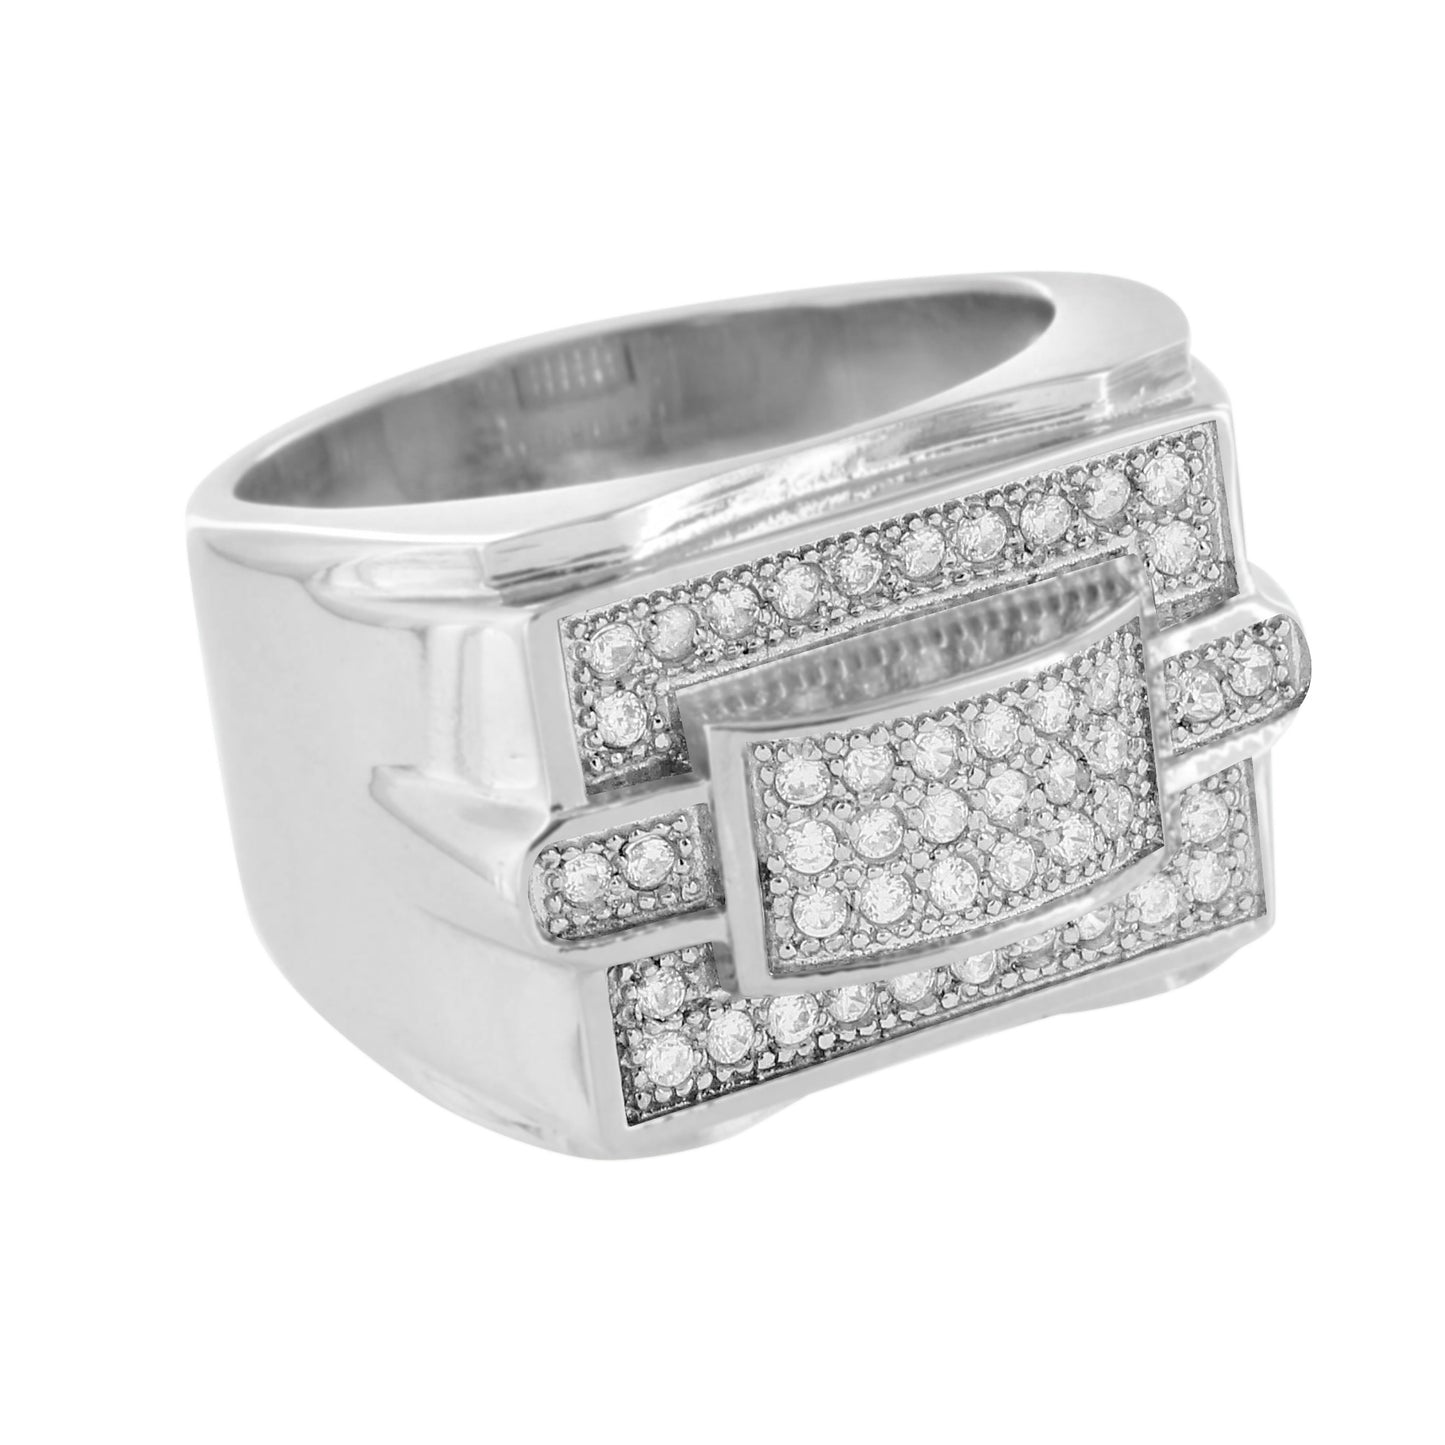 Mens Wedding Ring Simulated Diamonds Stainless Steel Pave Set Unique Designer